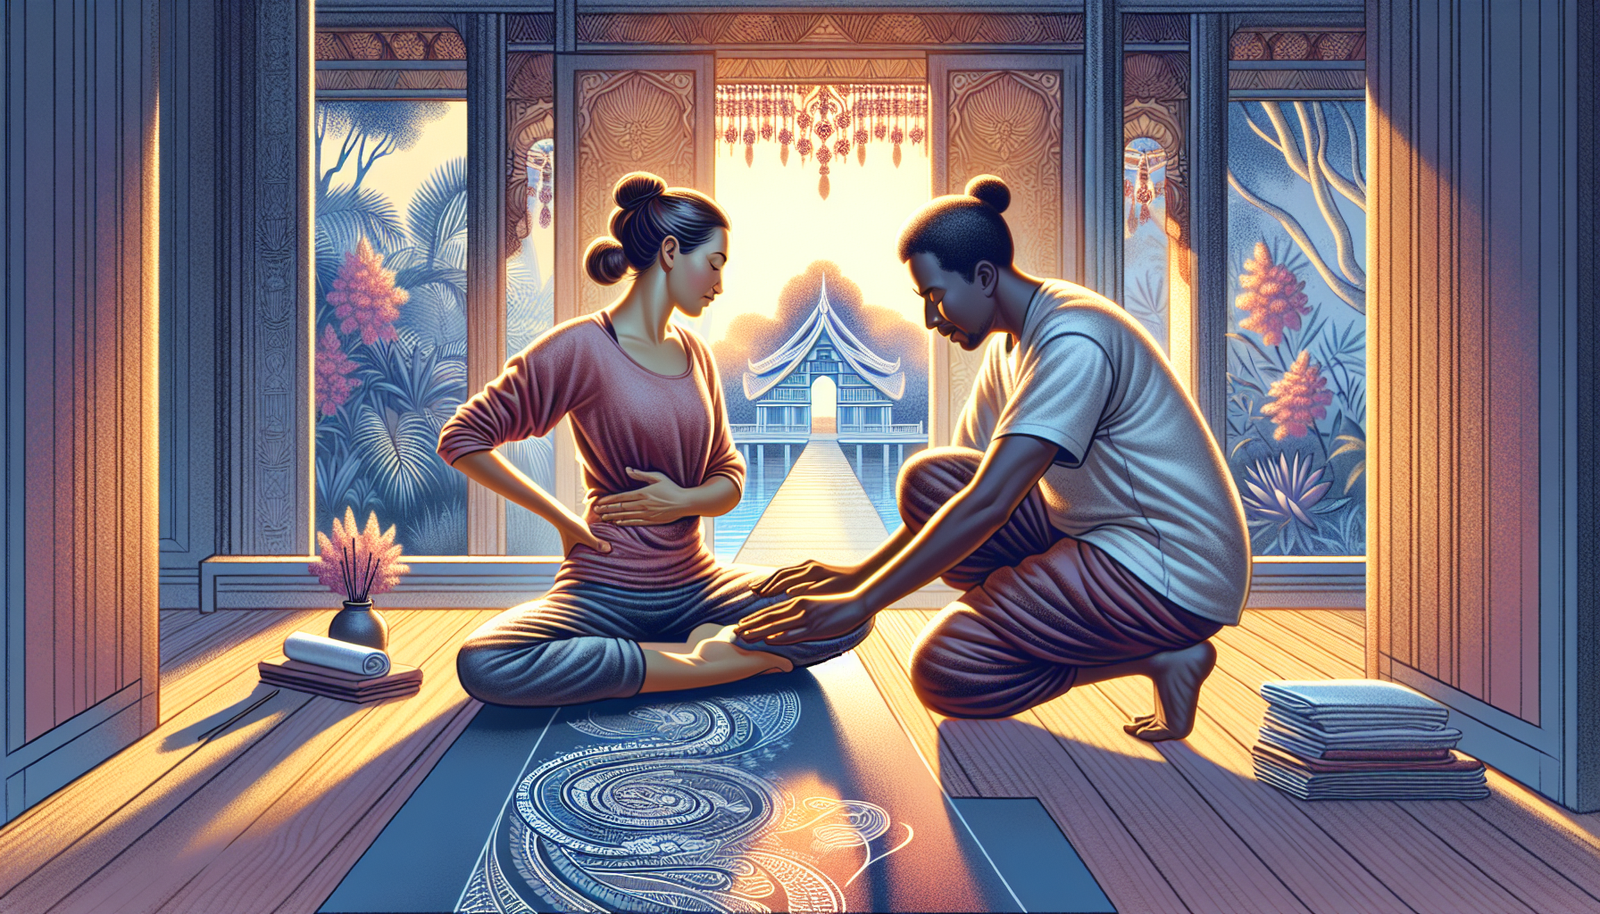 Illustration of a person consulting a yoga instructor